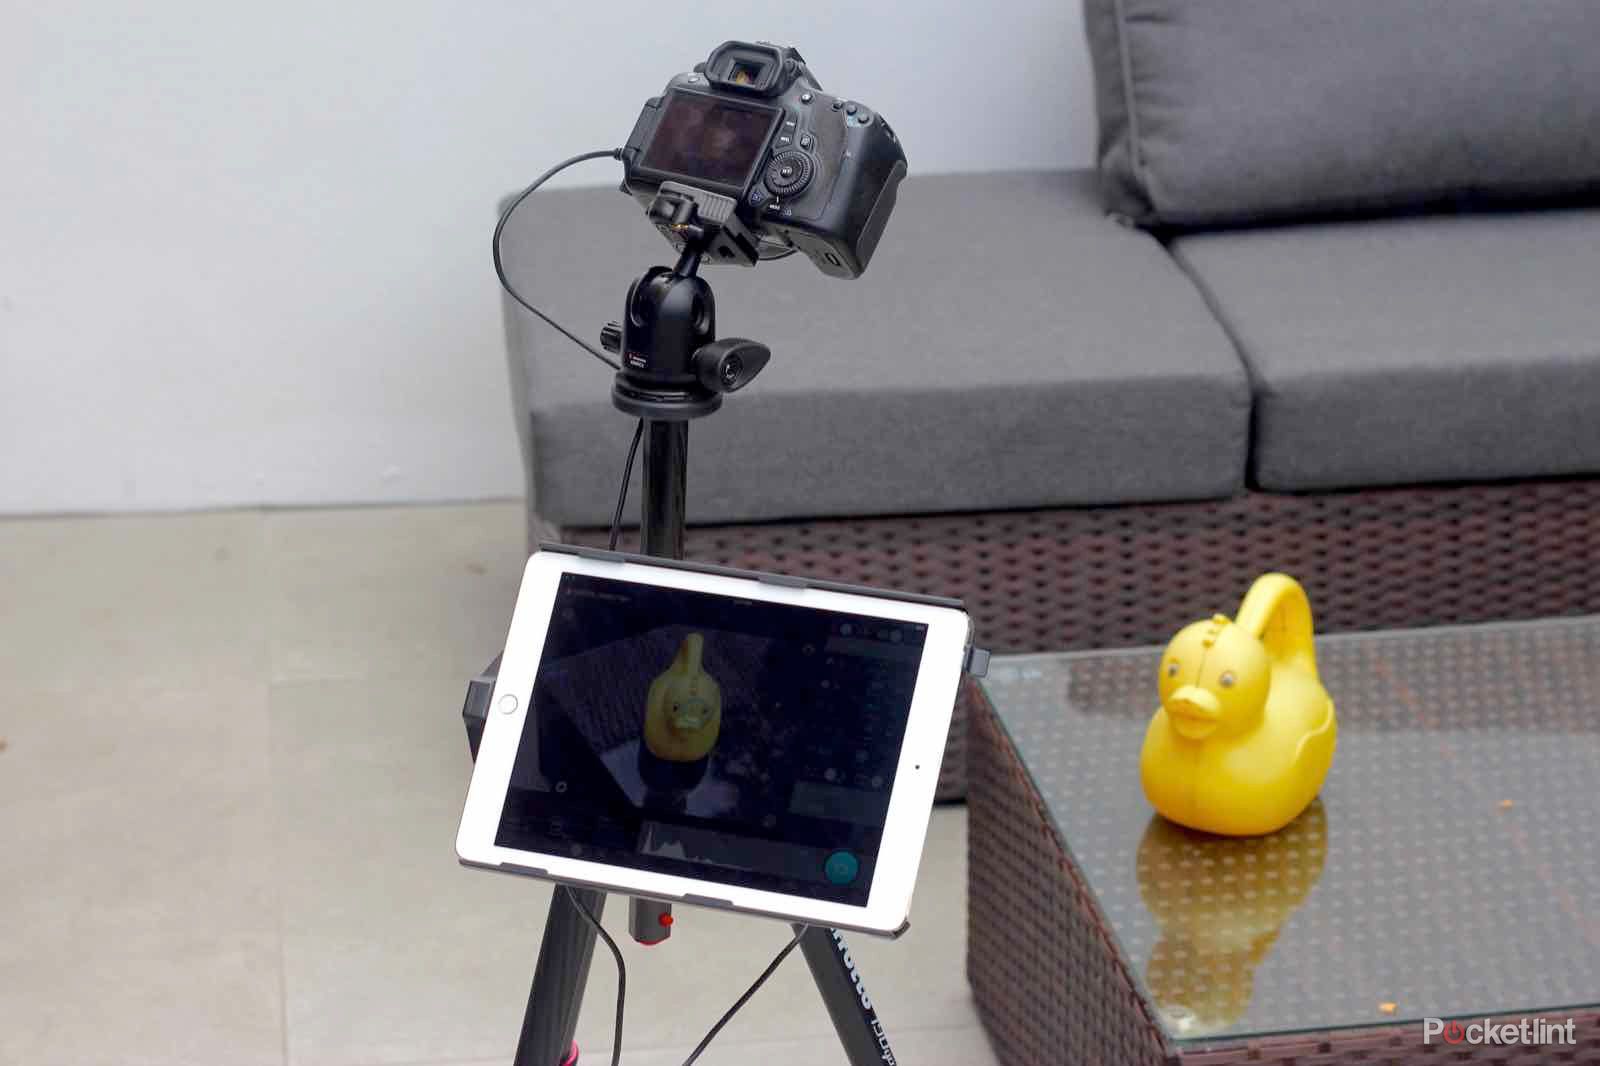 manfrotto digital director for ipad air 2 review image 2